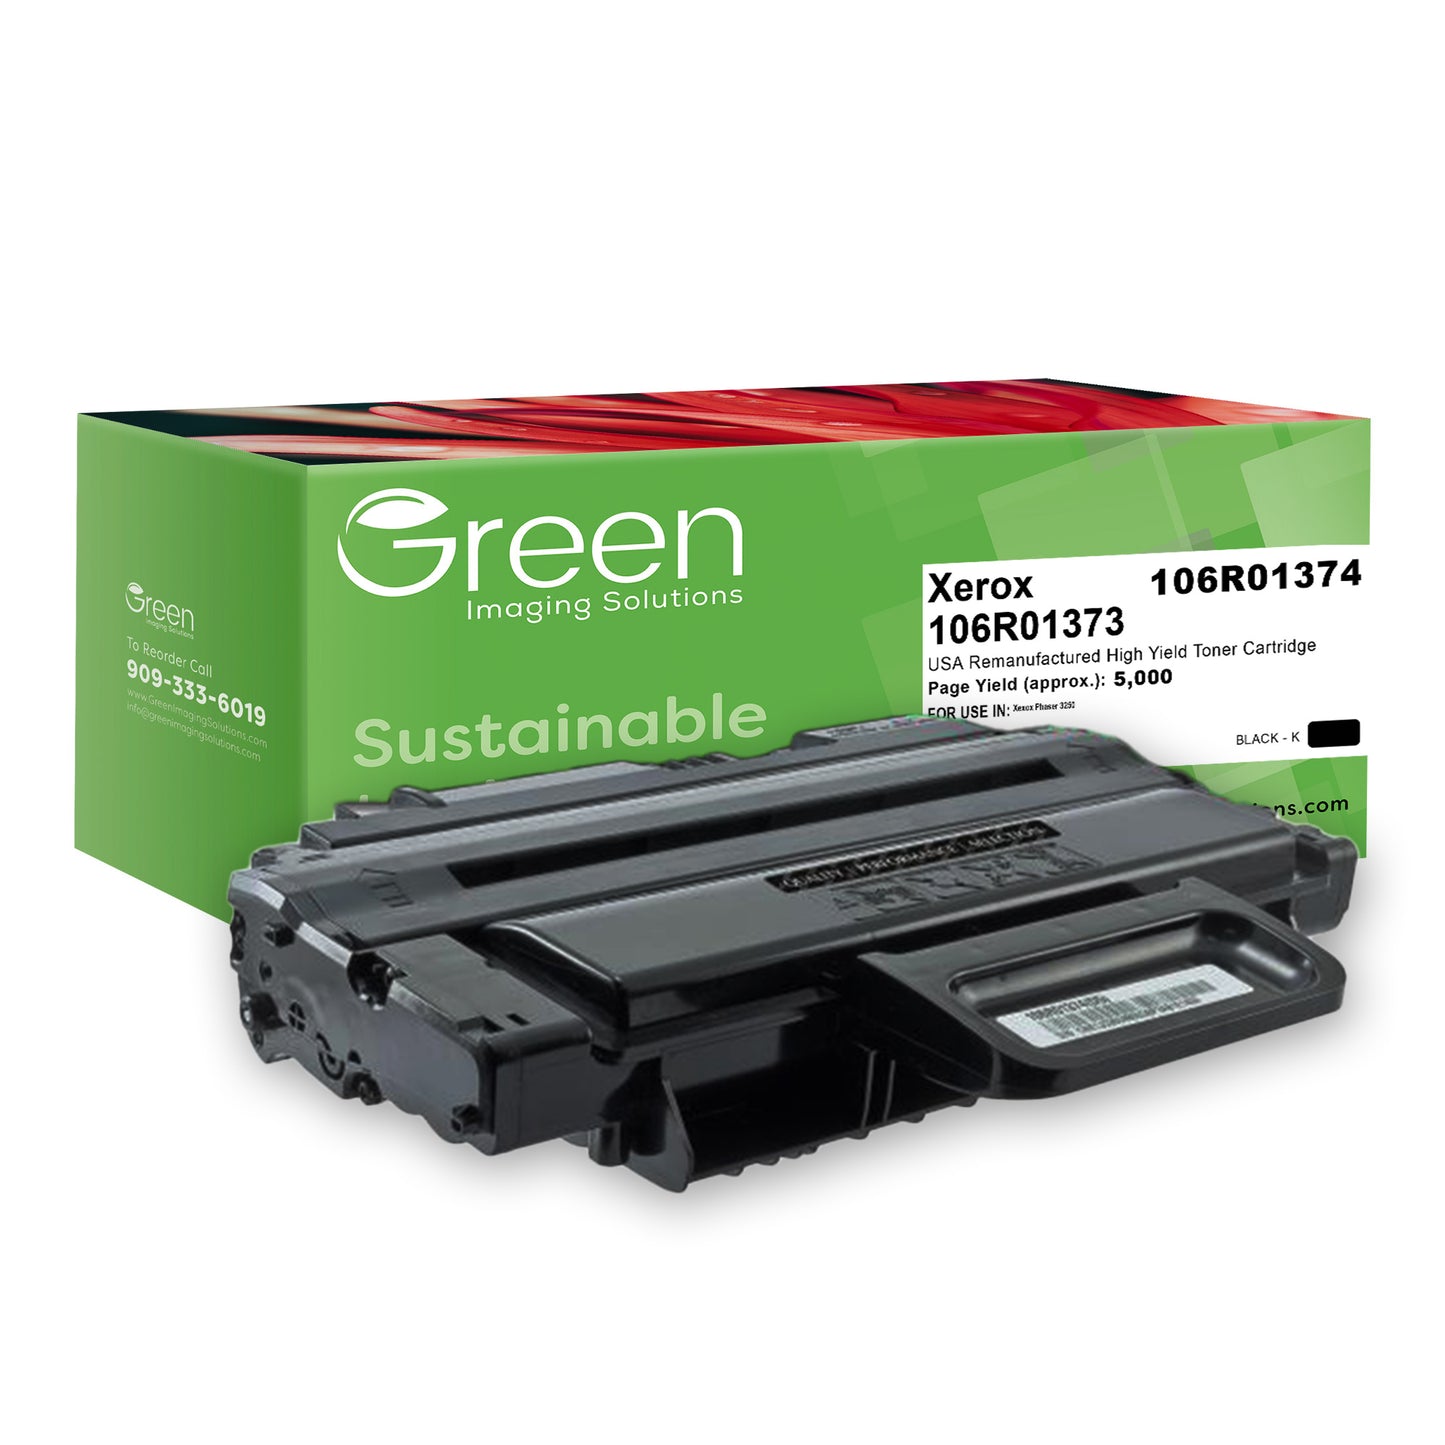 Green Imaging Solutions USA Remanufactured High Yield Toner Cartridge for Xerox 106R01373/106R01374